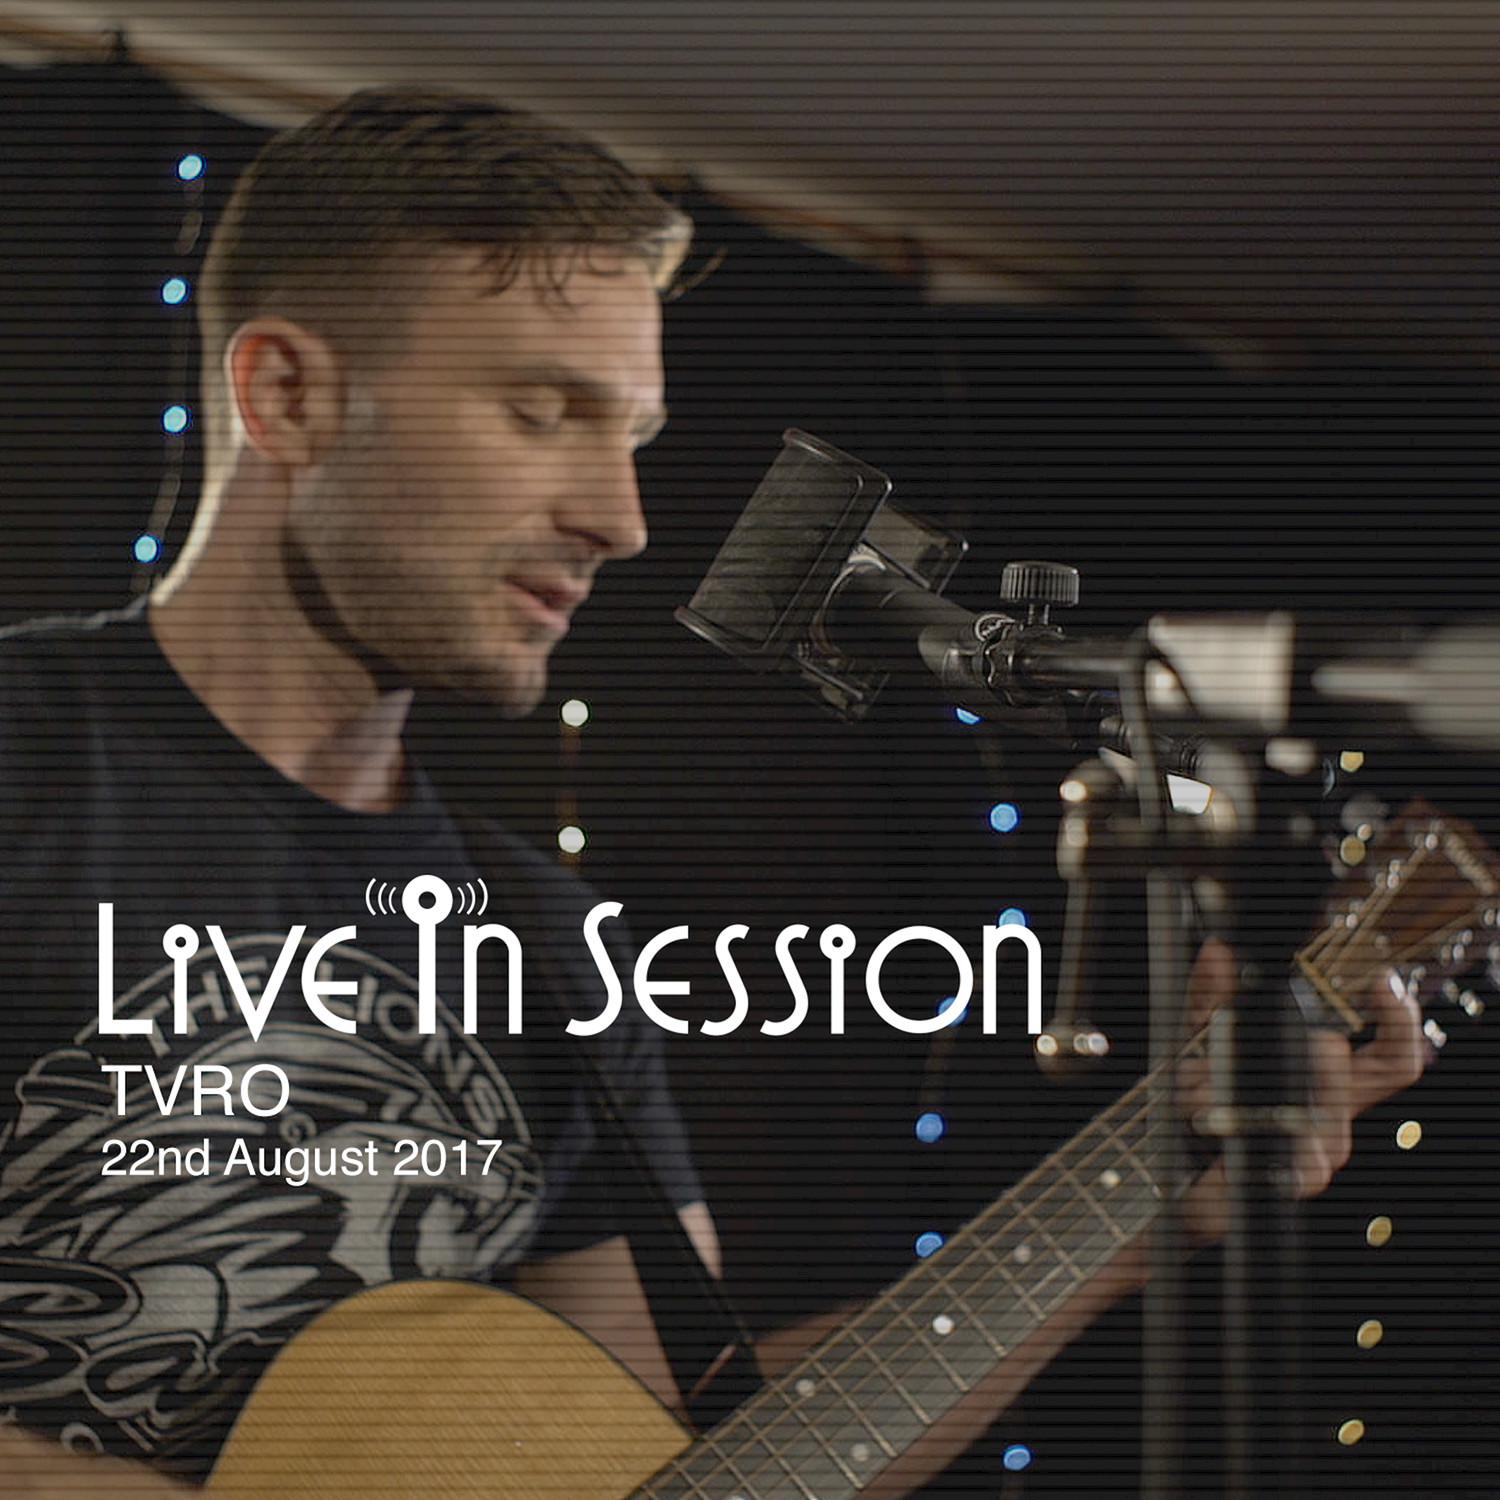 I Feel Love (Live in Session)